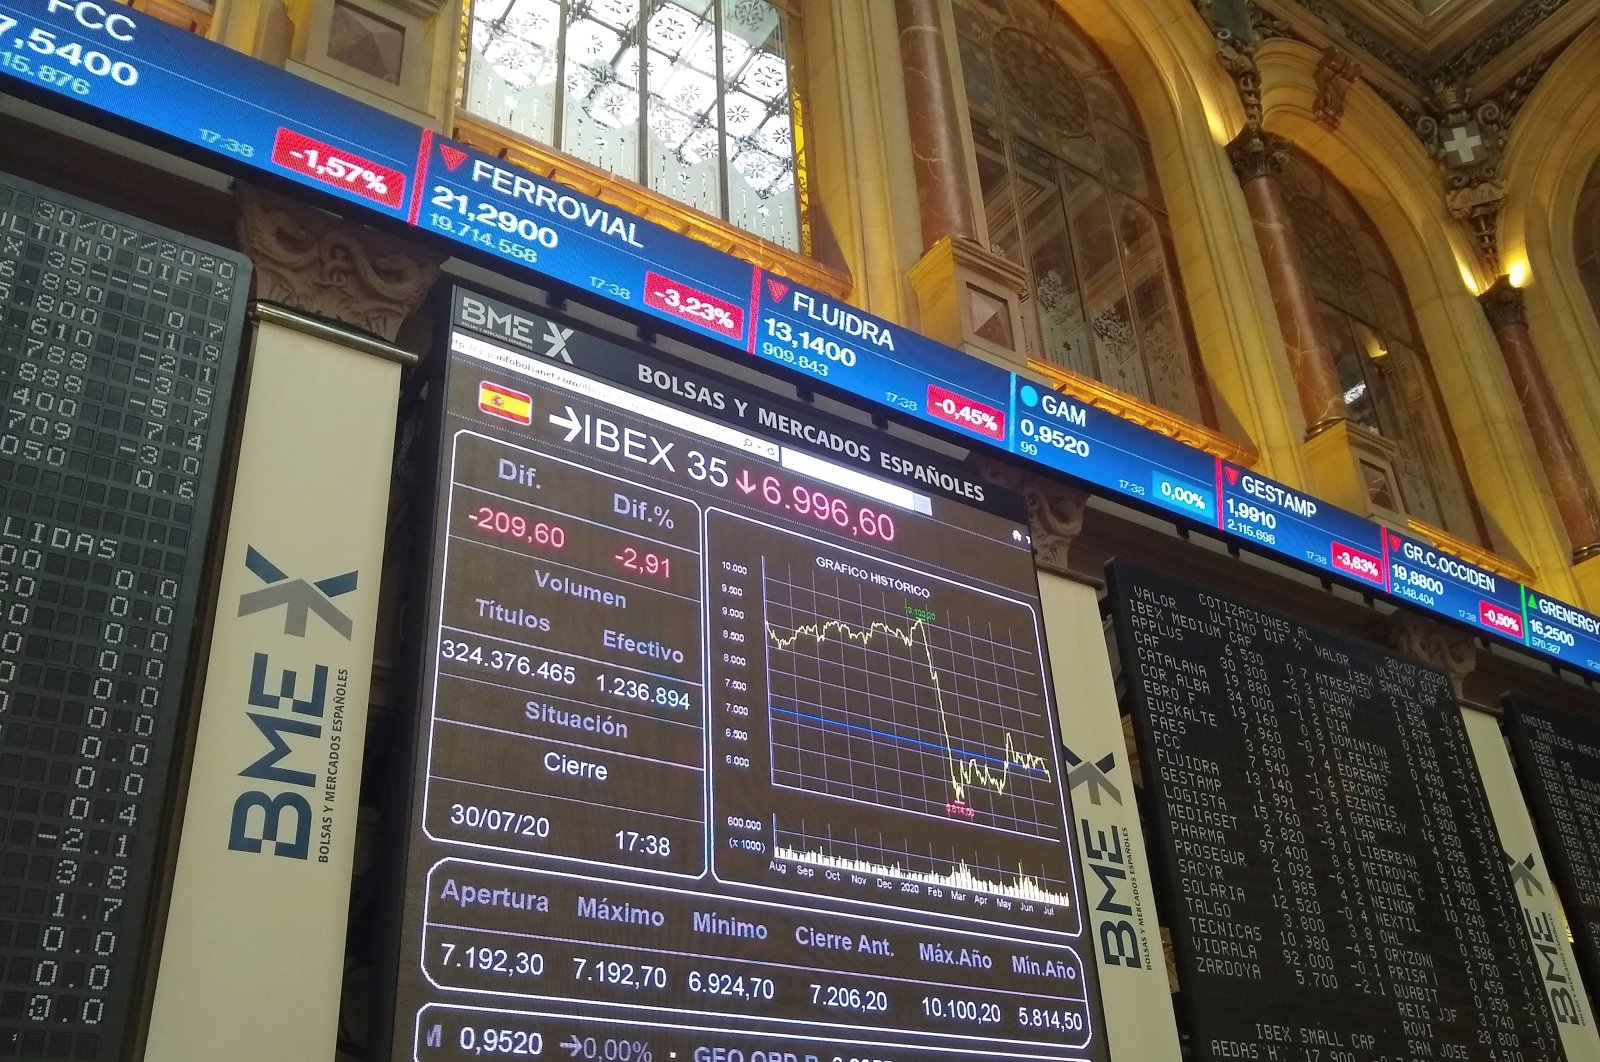 Screens show stock information at the close of the session on the Madrid Stock Exchange, in Madrid, Spain, July 30, 2020. (EPA Photo)